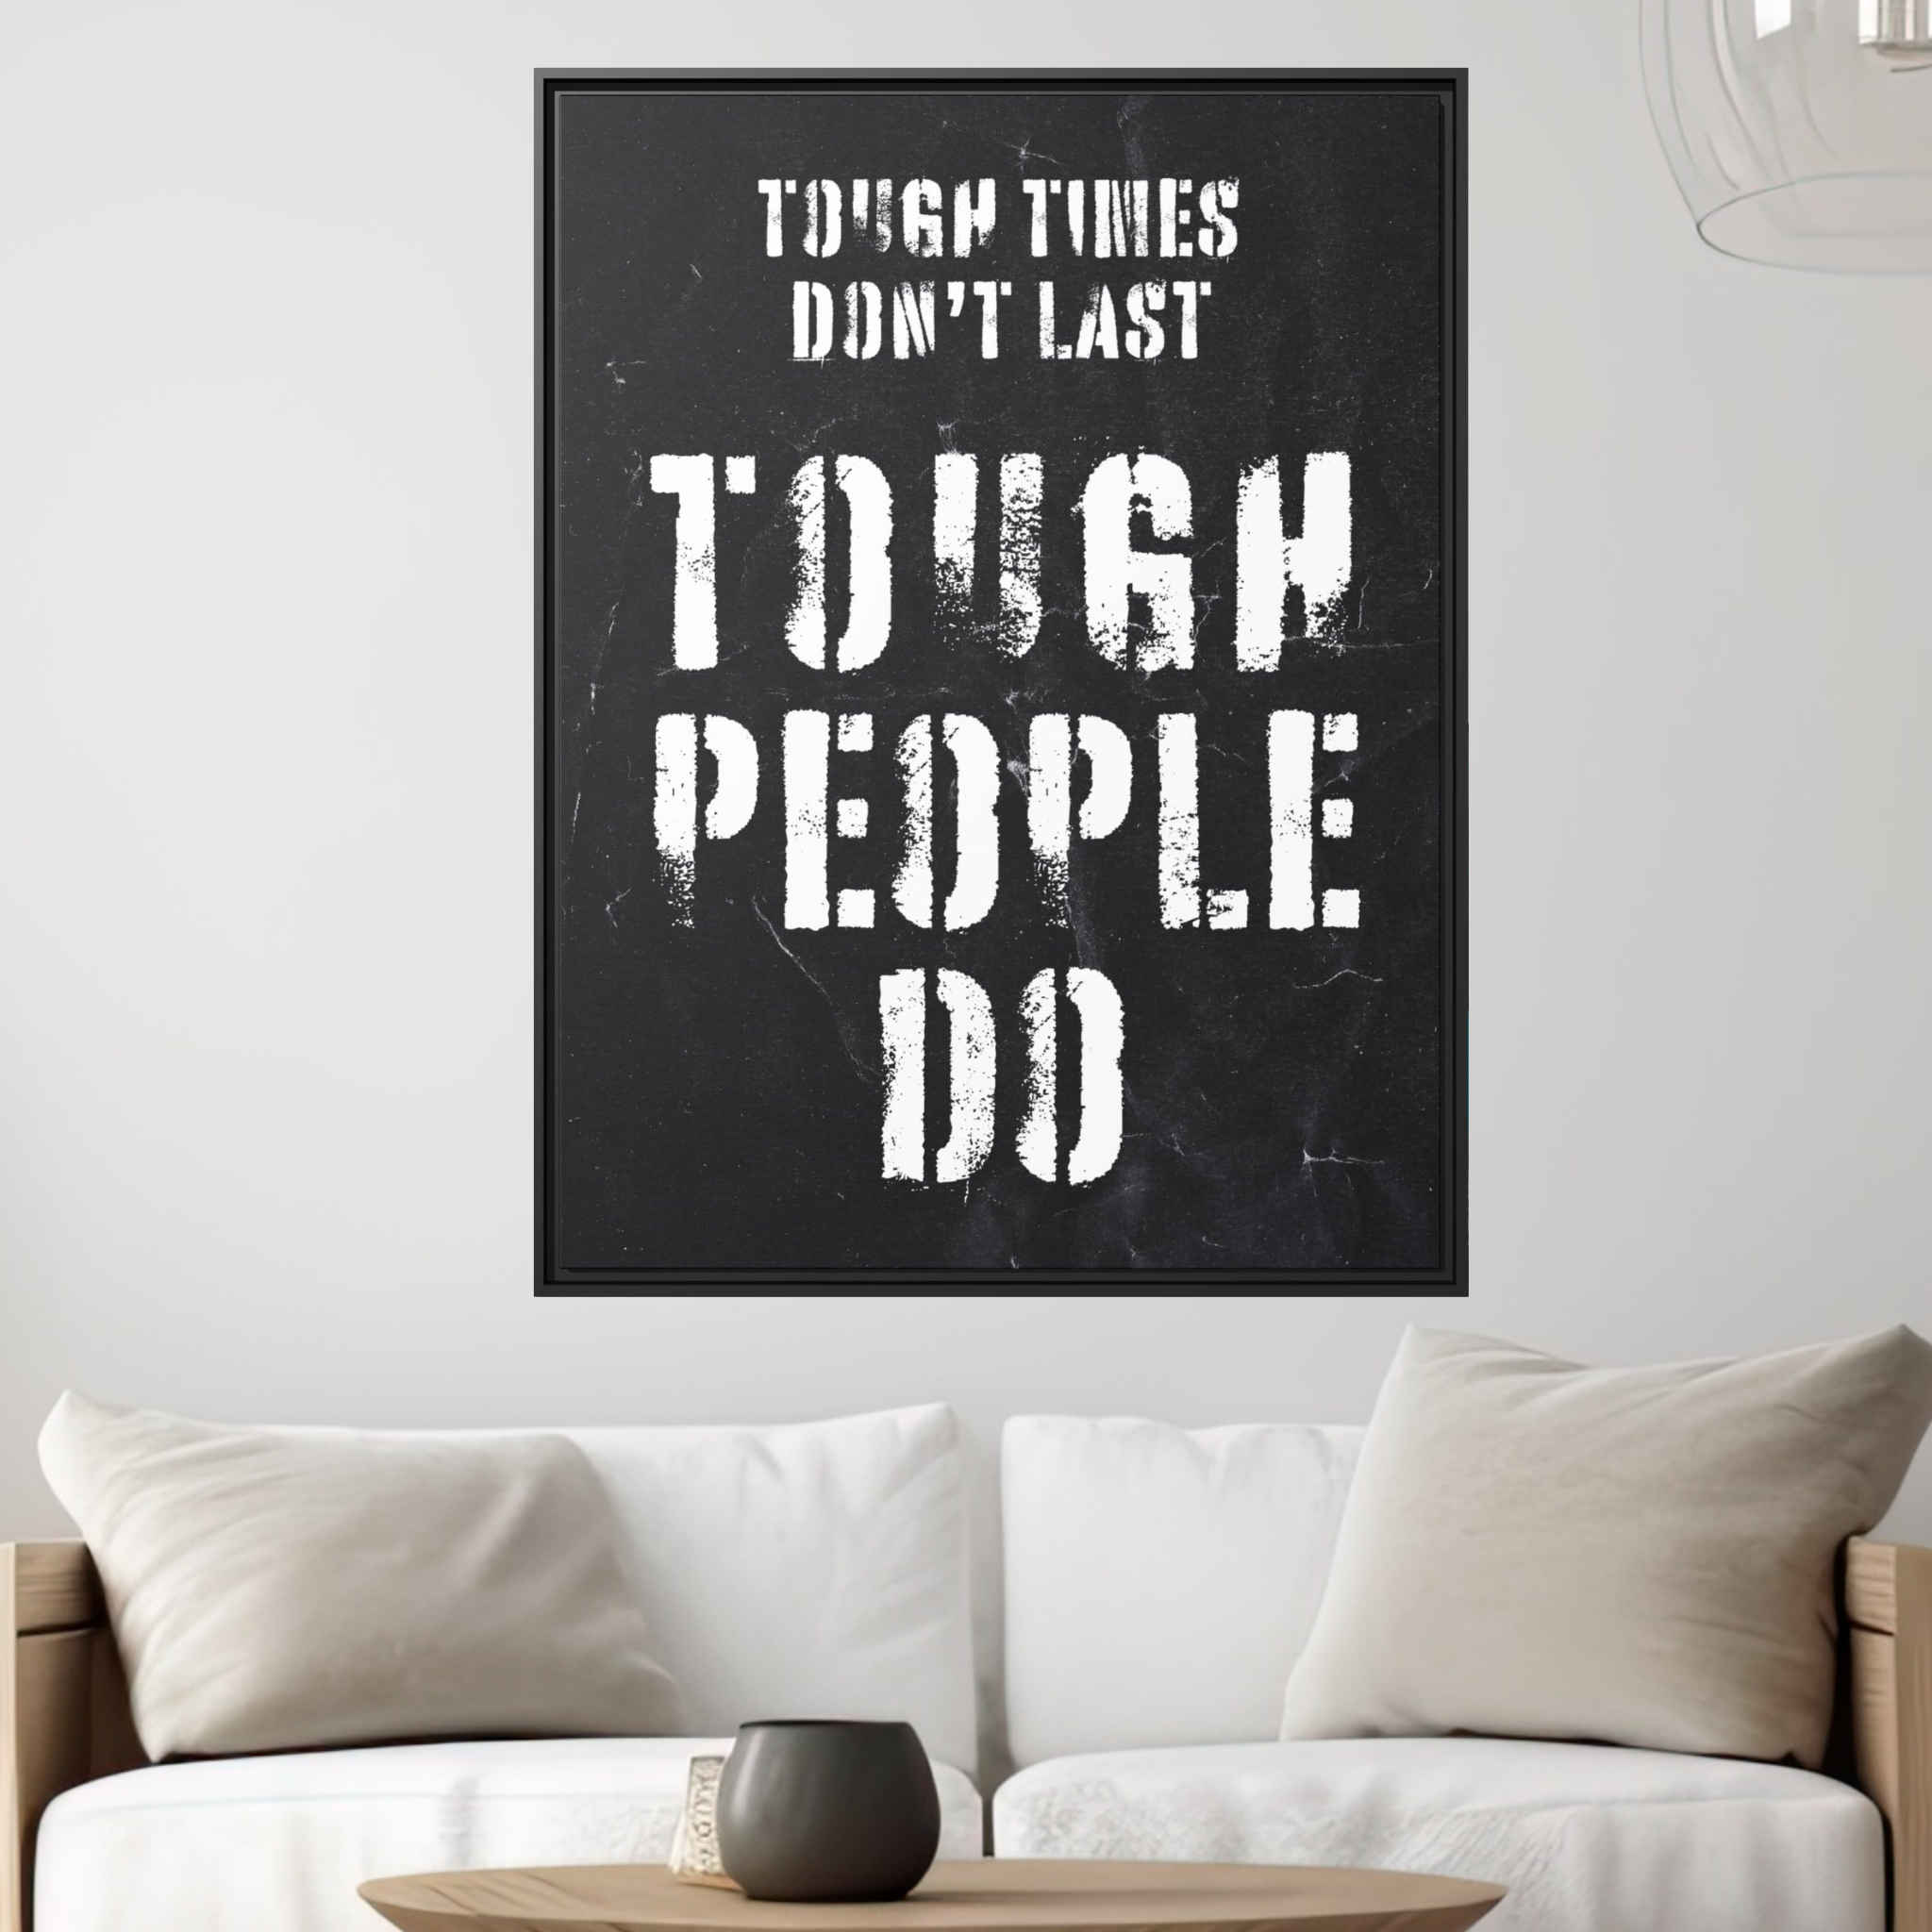 Tough Times Don't Last Wall Art - The Design Station